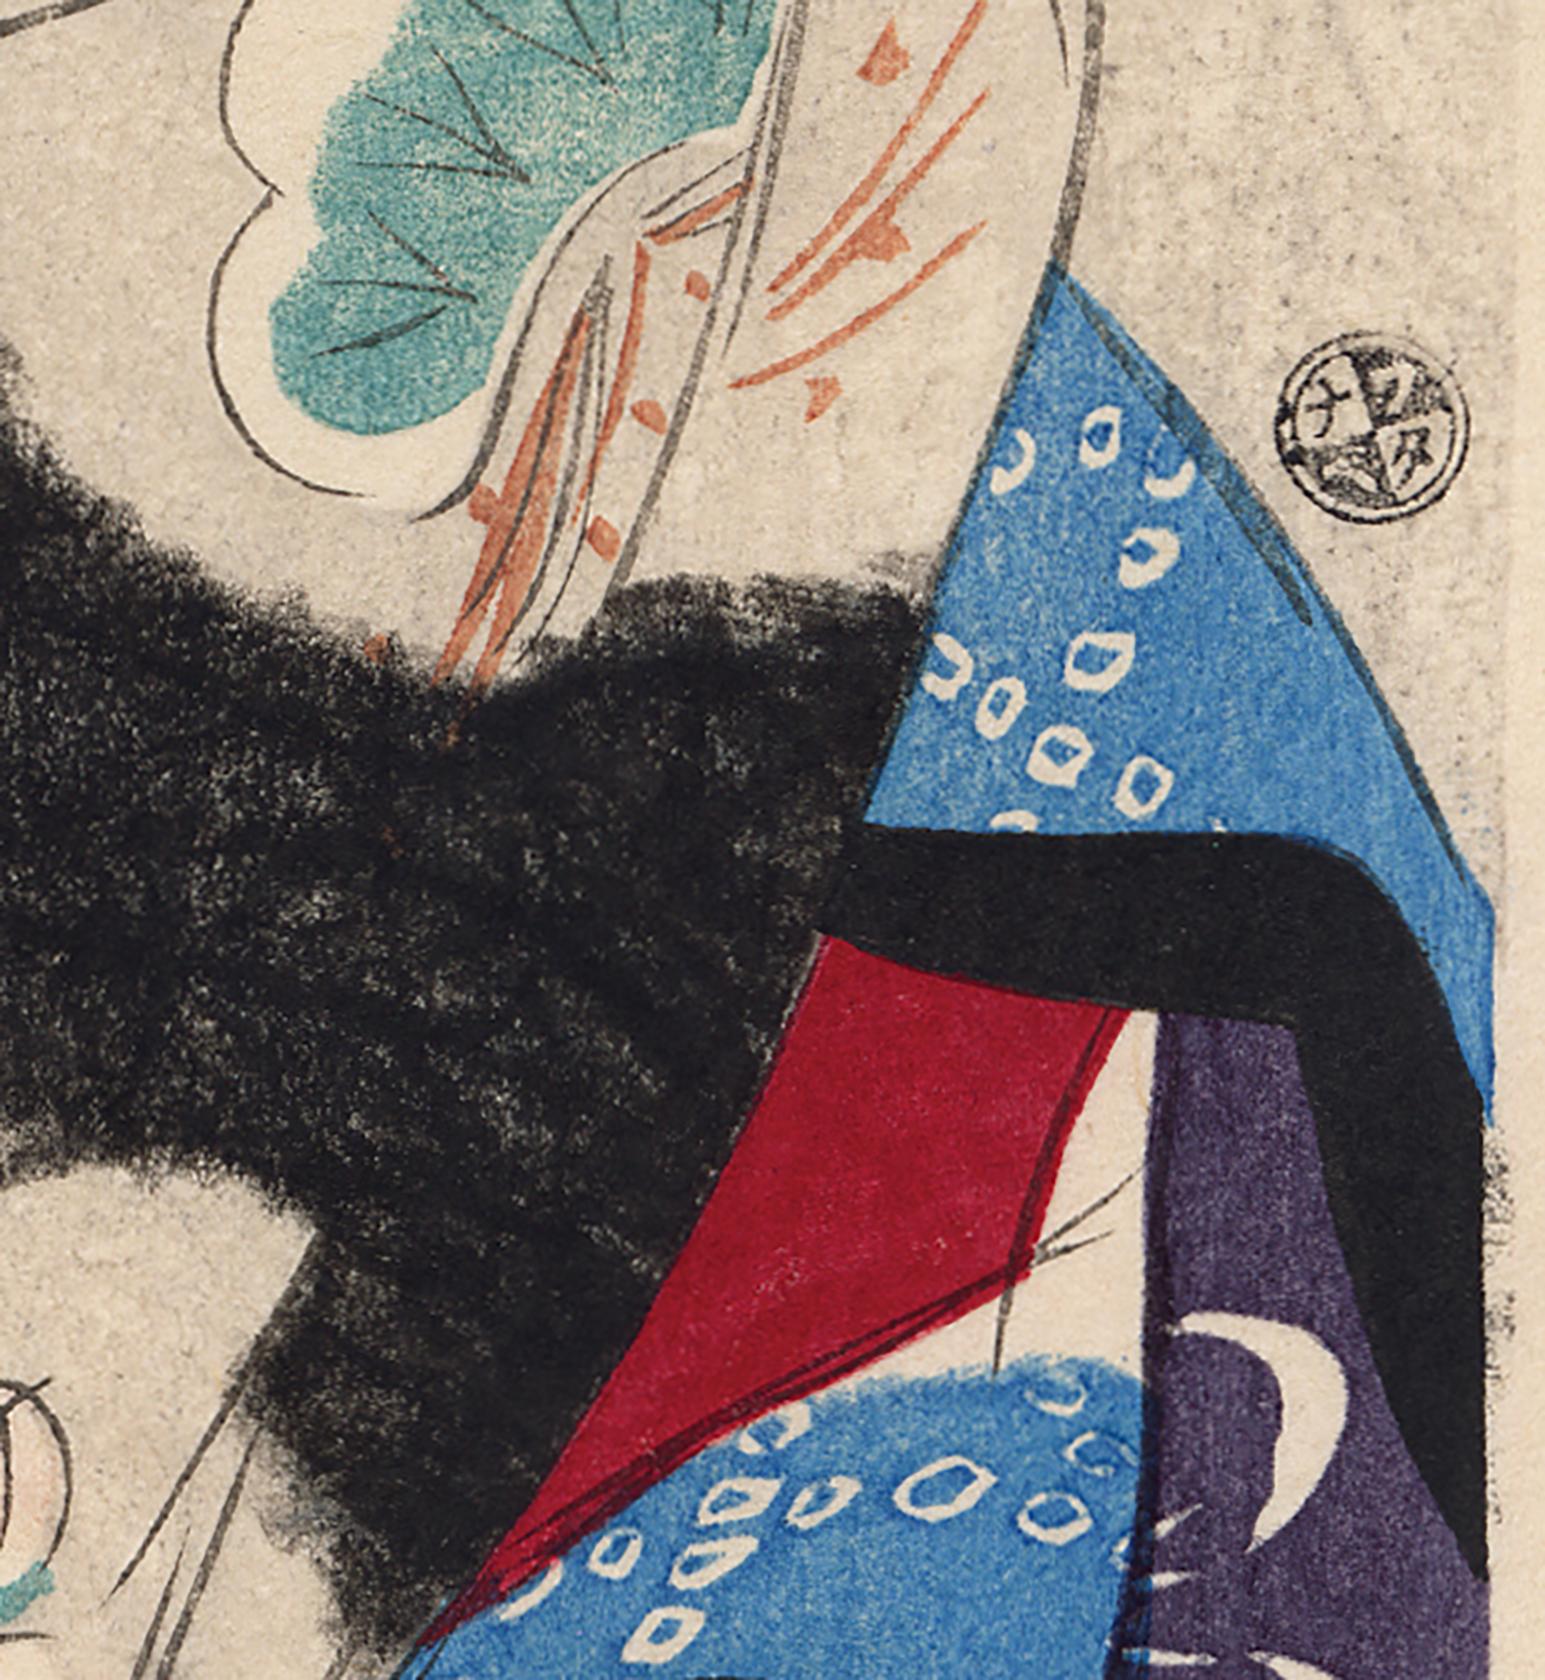 A maiko shyly covers her mouth with her sleeve. An apprentice geisha, she wears the maiko’s distinctive red collar and hairstyle. She could be contemplating the public odori dances that are held each spring. The black of the robe is printed in a